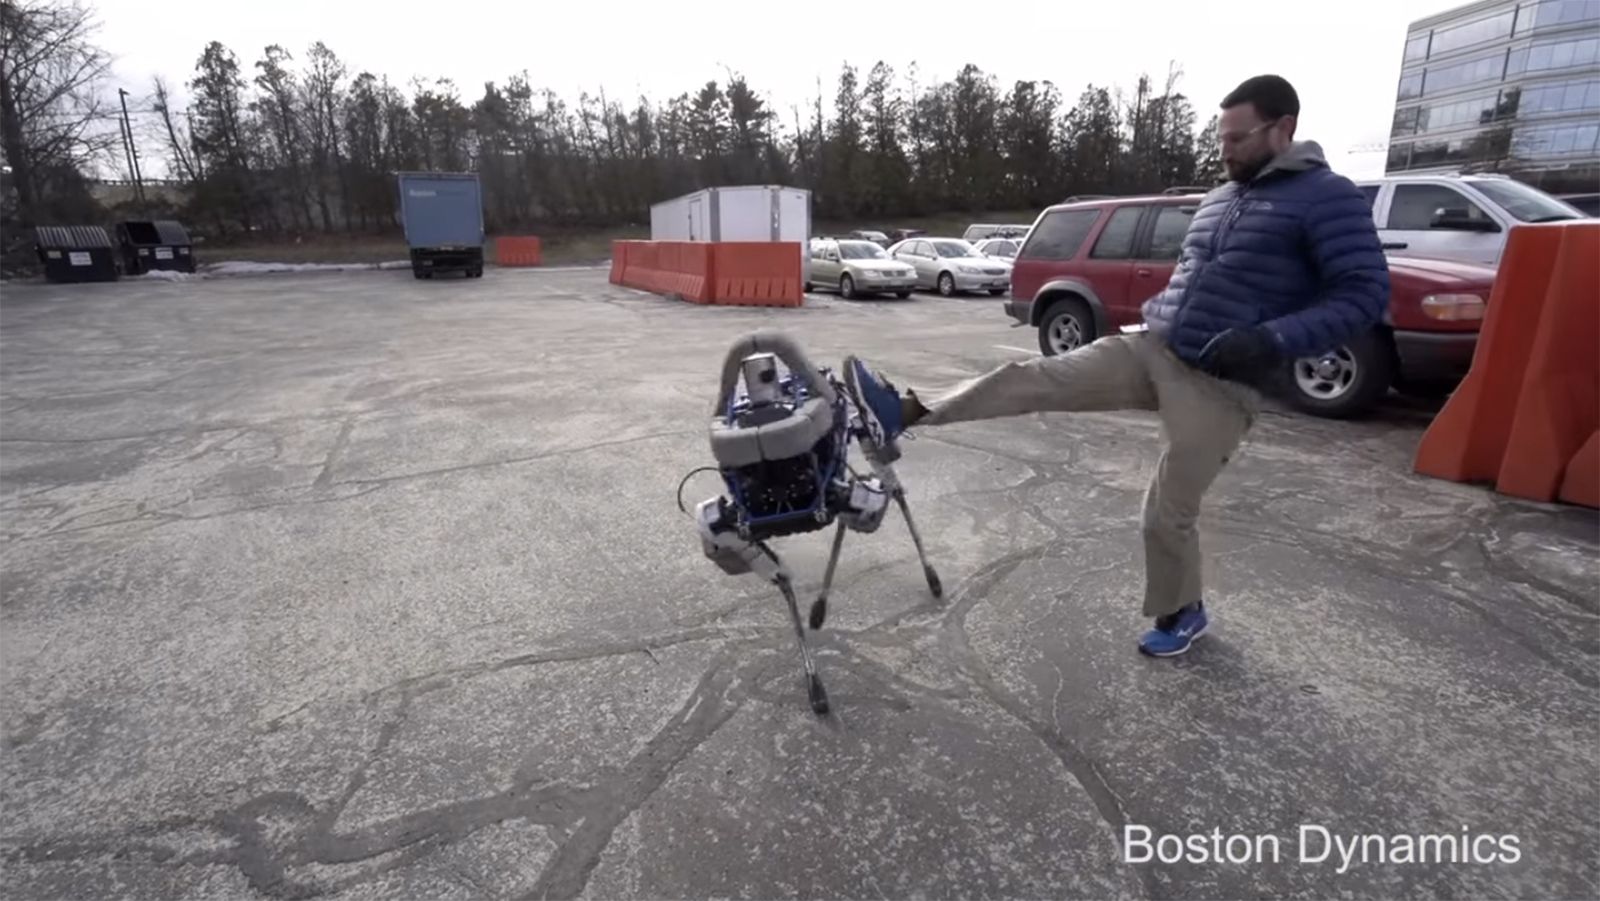 boston dynamics new robo dog spot is more of a pup small but strong image 1